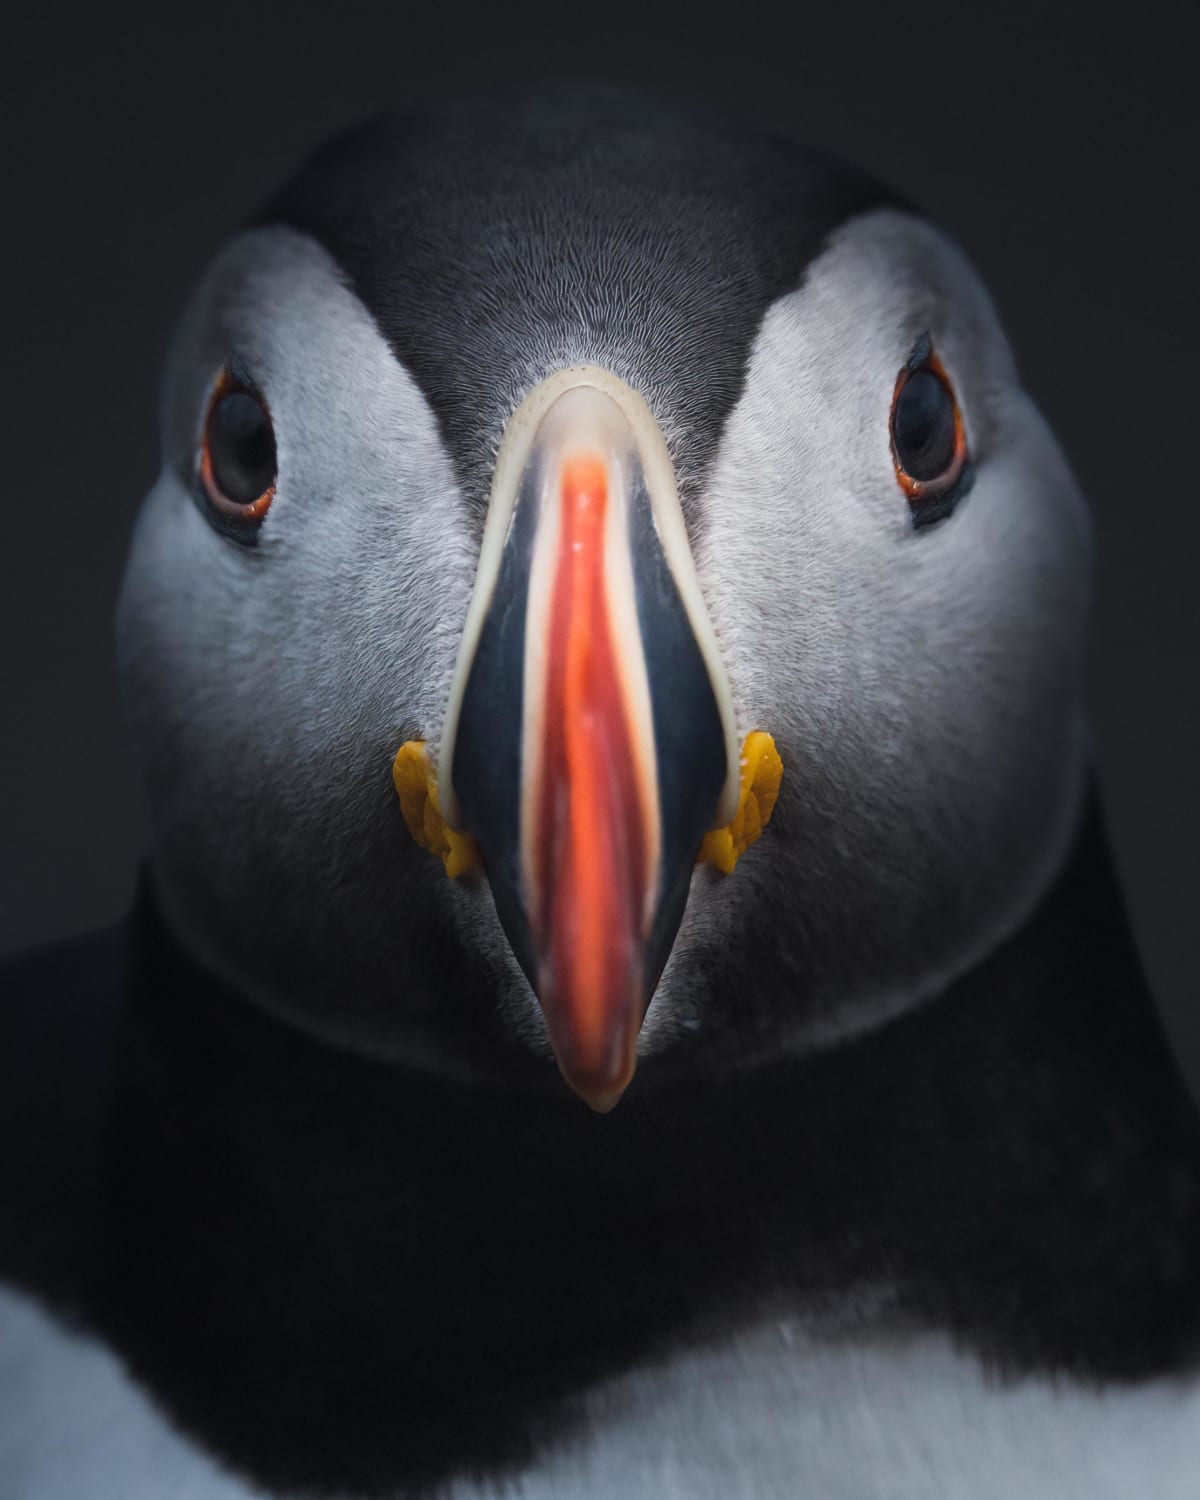 Puffin,Me,Photography,2022